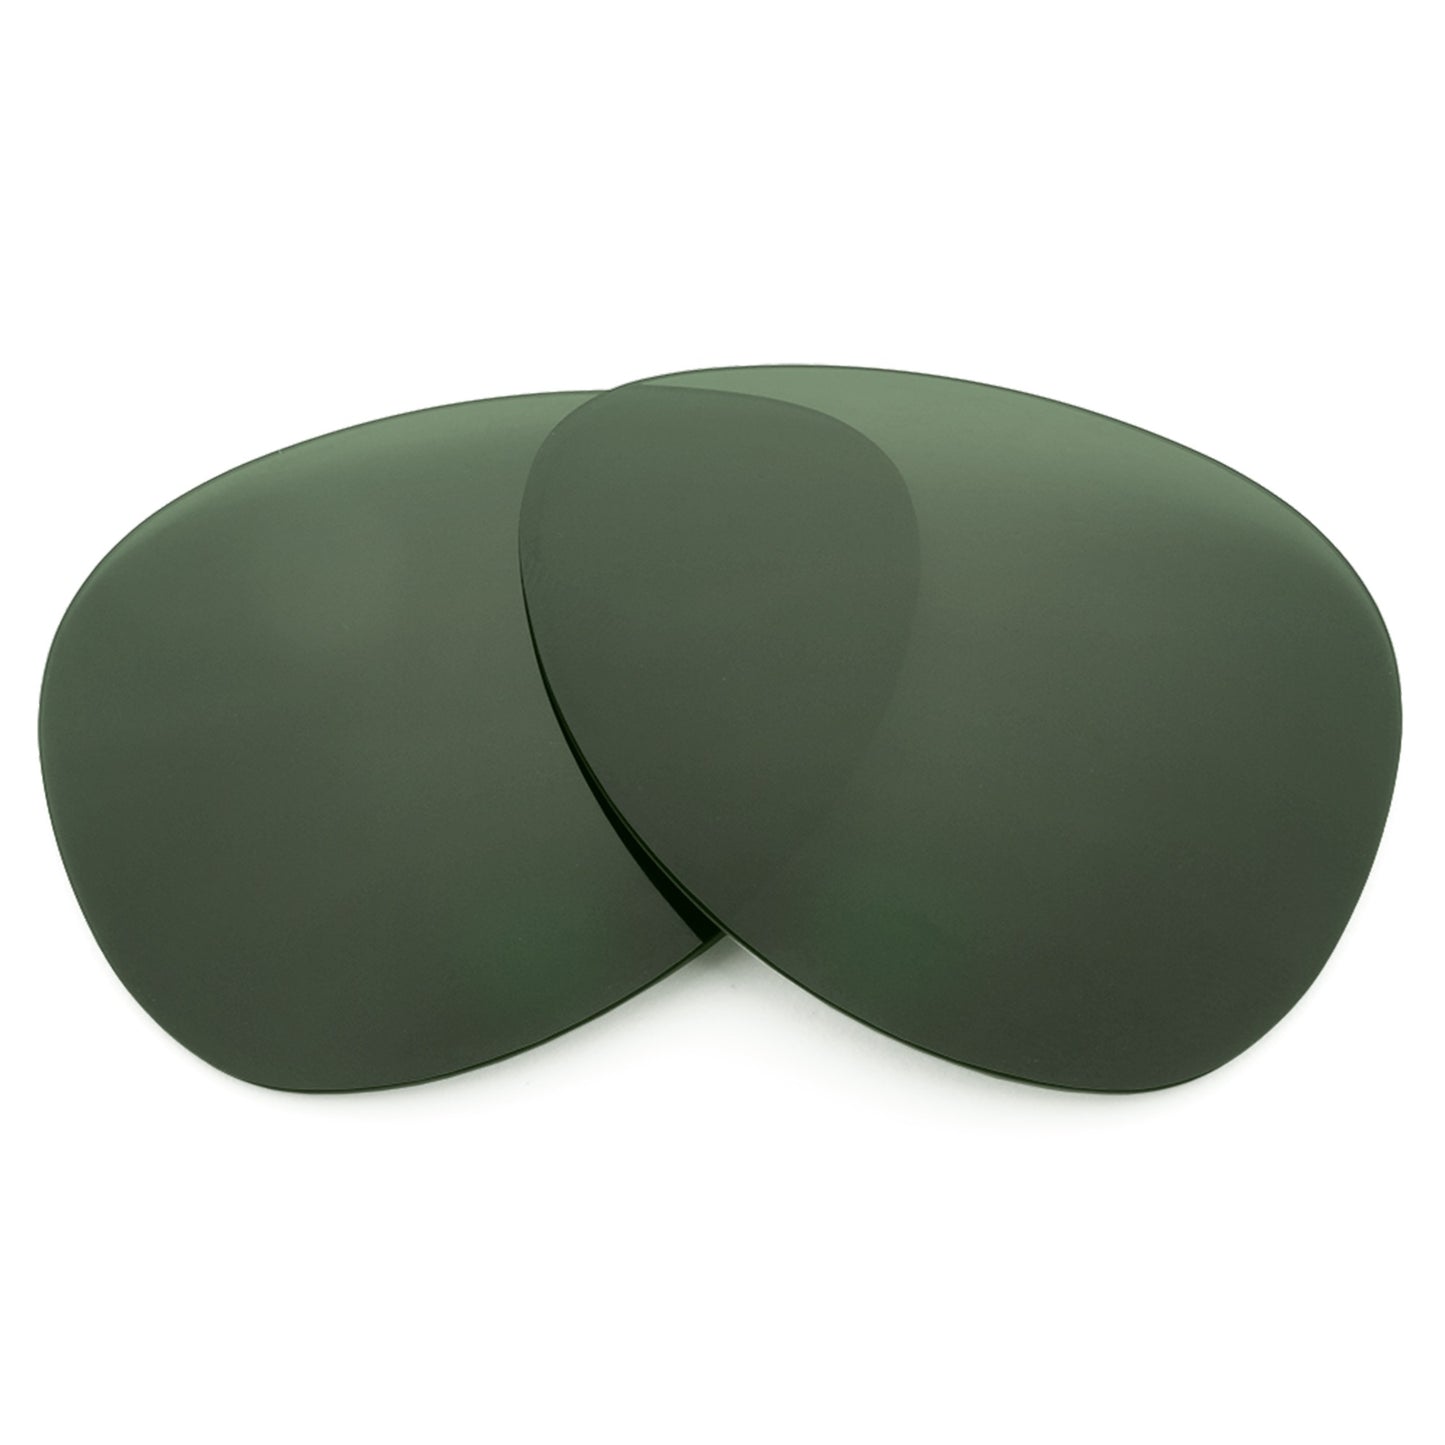 Revant replacement lenses for Ray-Ban RB4189 64mm Non-Polarized Gray Green